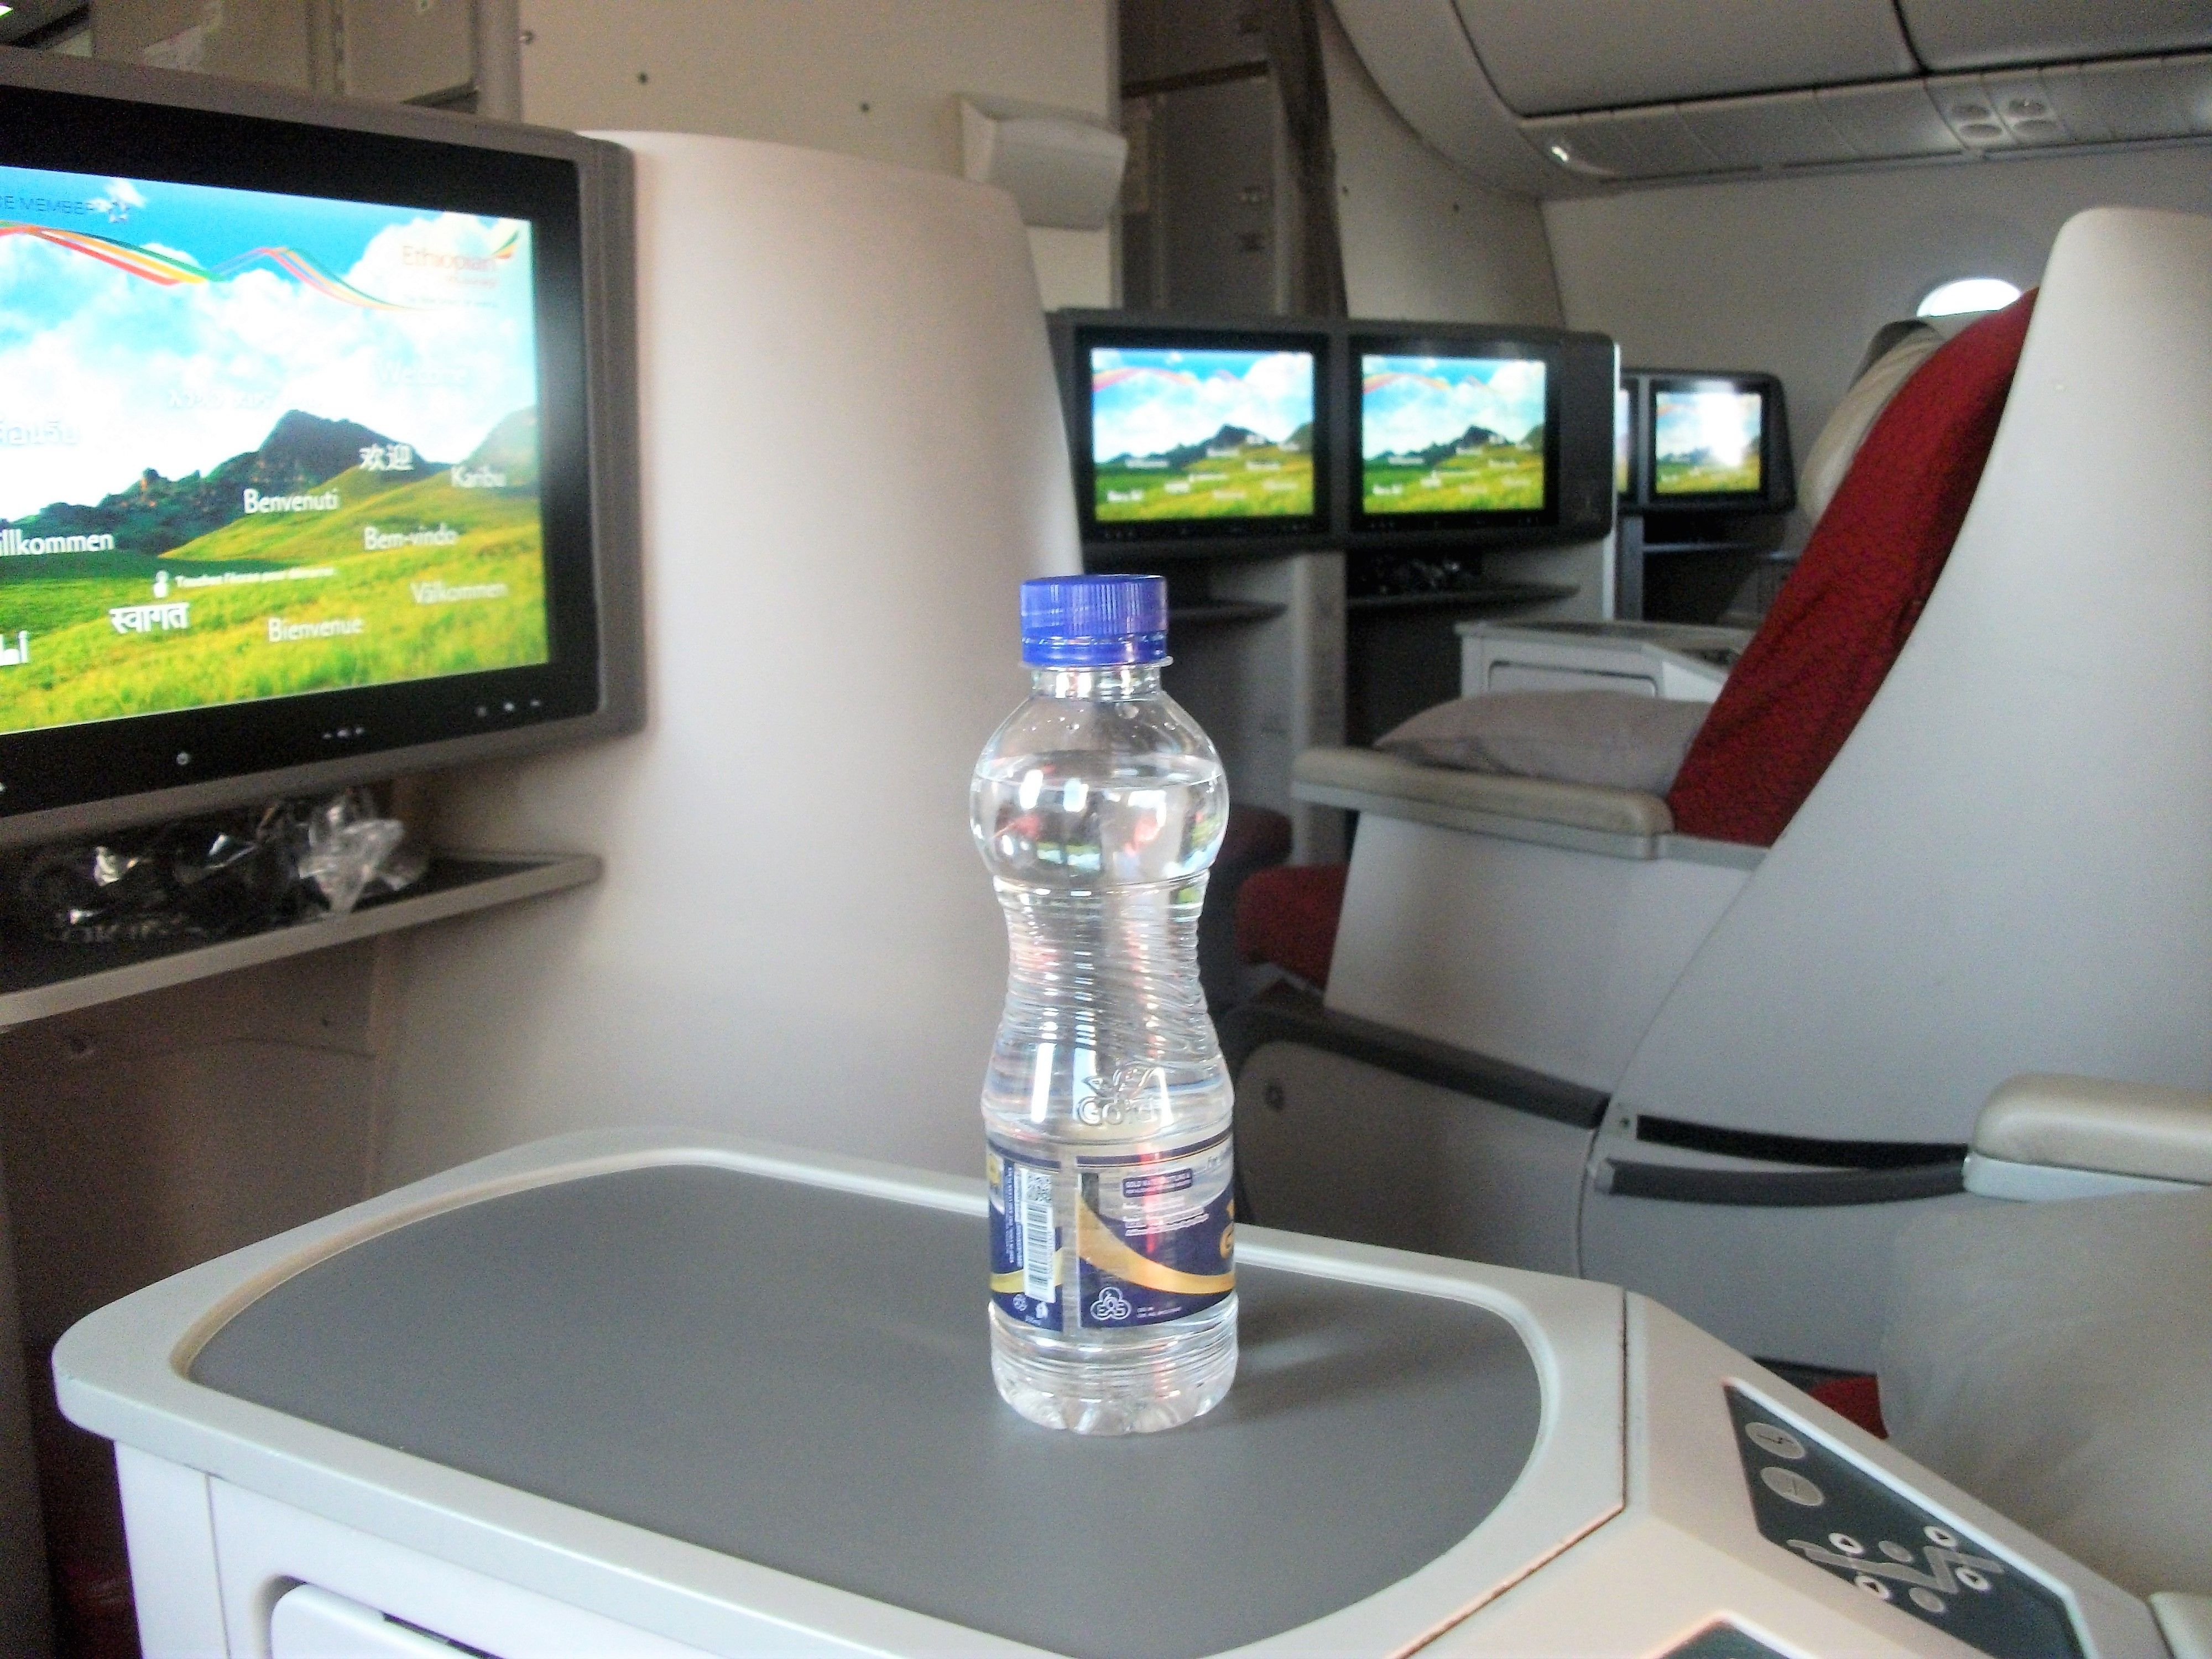 Ethiopian Airlines 787 business class cabin